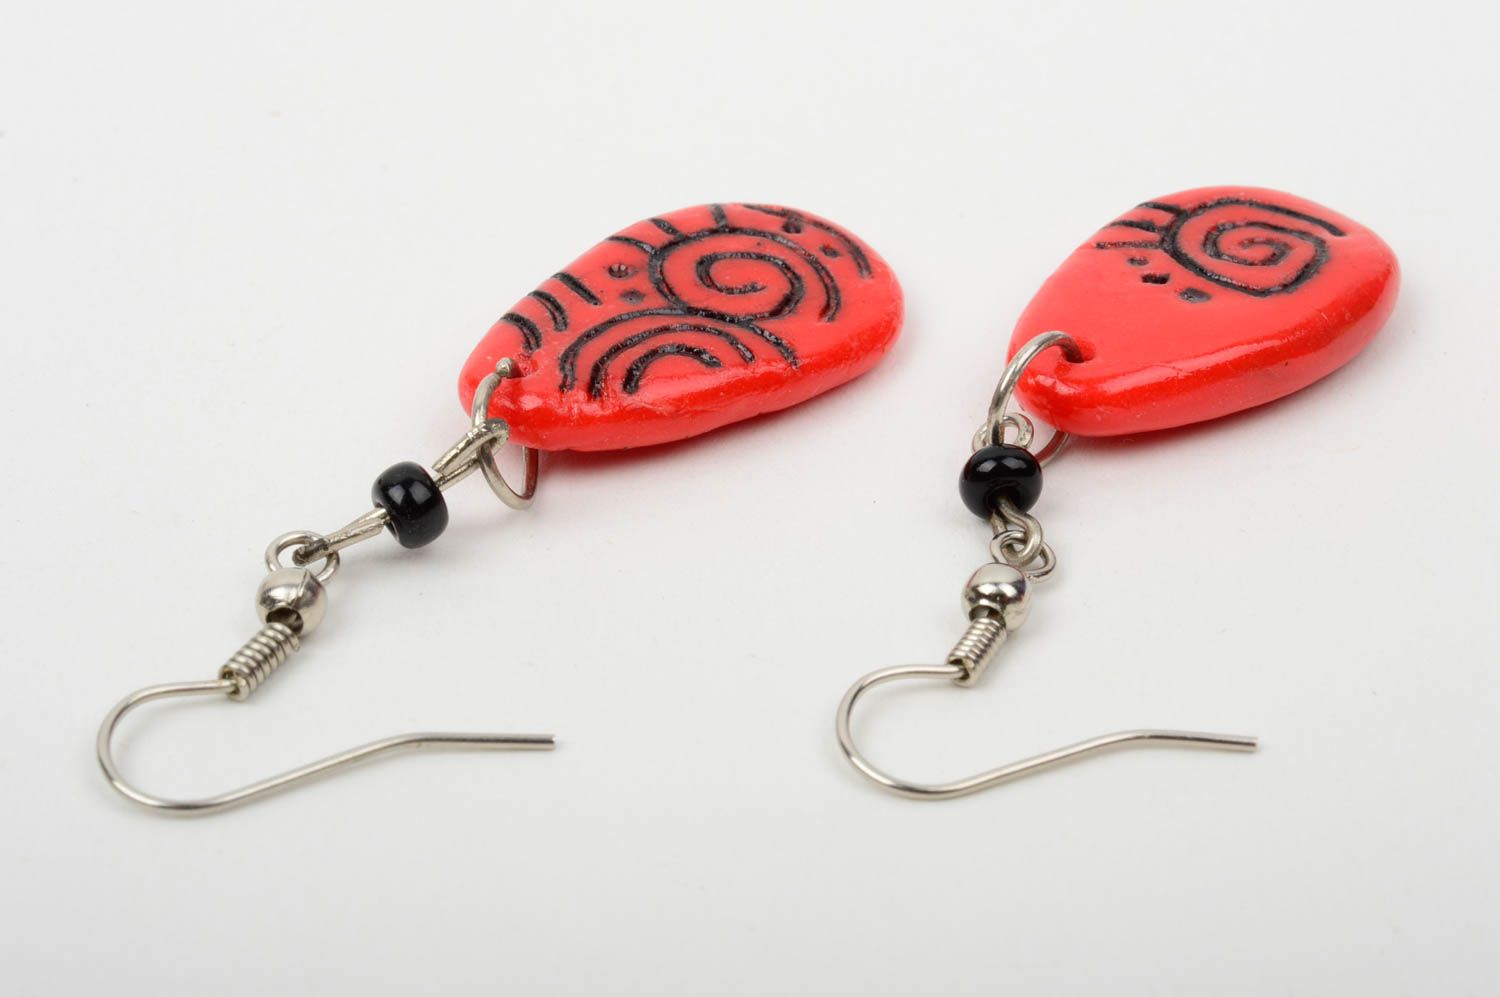 Handmade jewelry designer accessories polymer clay dangling earrings gift ideas photo 5